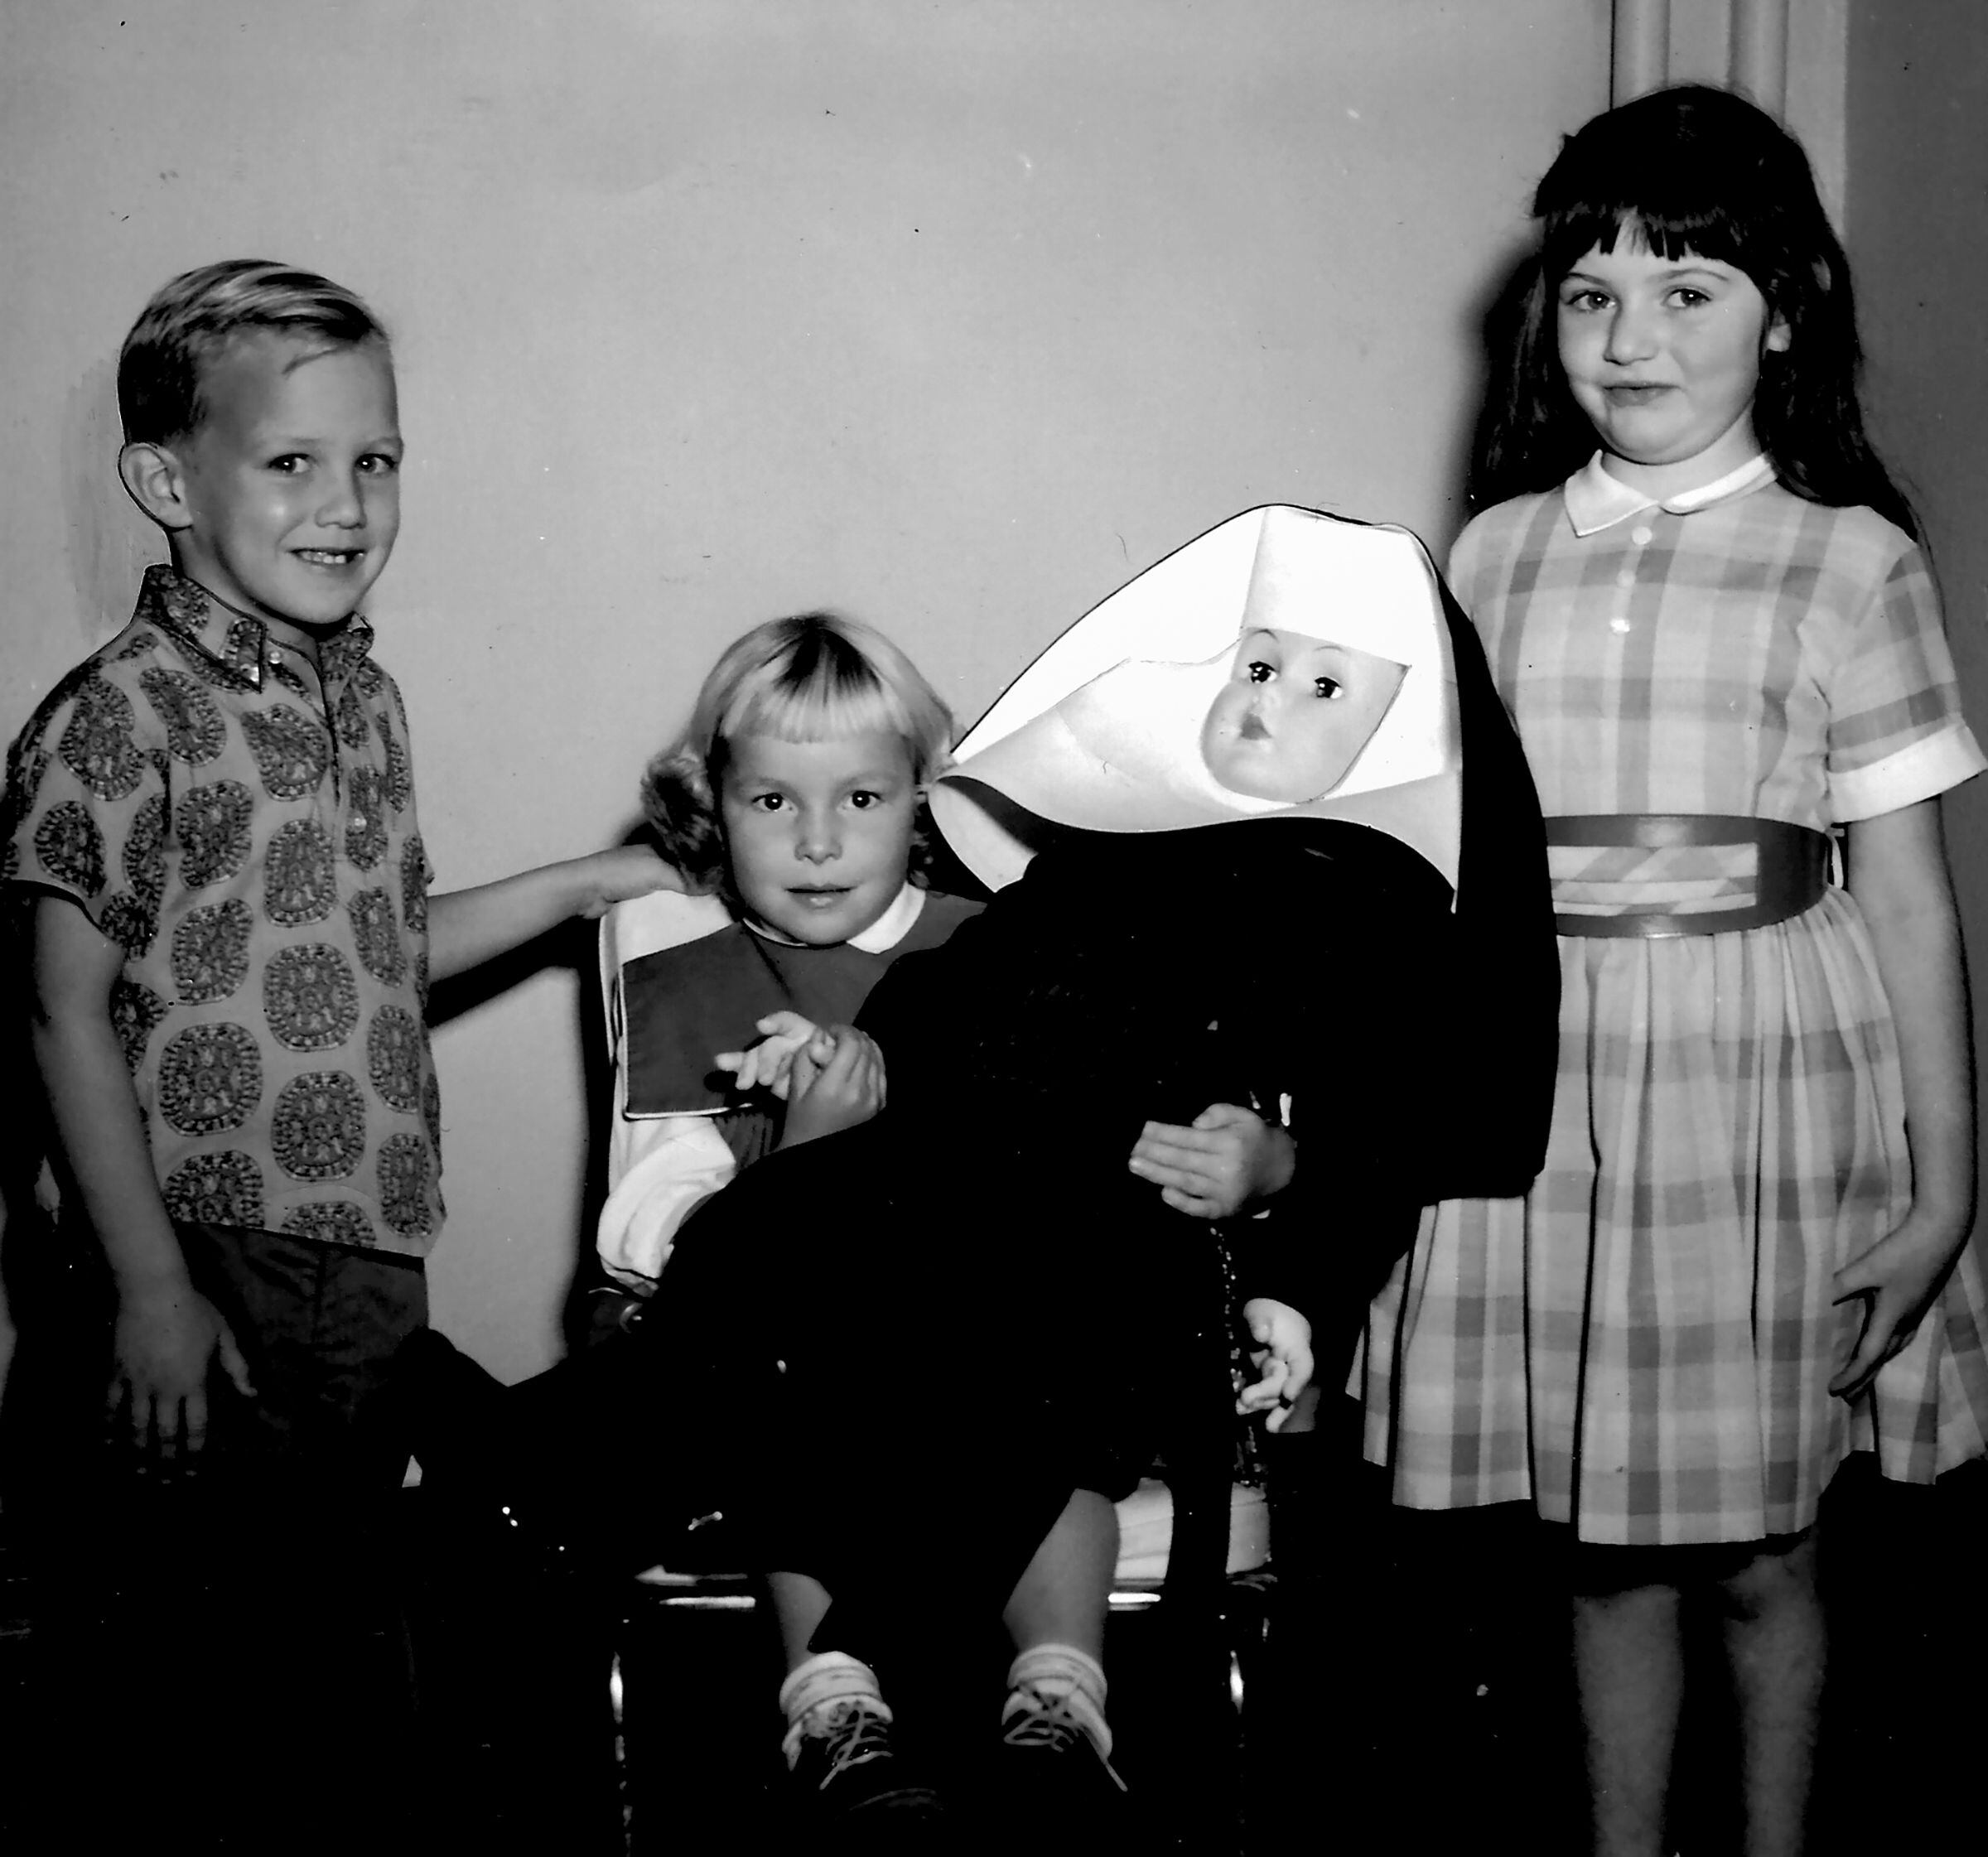 (Roman Catholic Diocese of Salt Lake City archives) Parochial schools were essential to encouraging Catholic schoolchildren to devote their lives to the church. Here three children at St. Ann School in the early 1960s hold a doll wearing the habit of their teachers, the Sisters of Charity of the Incarnate Word.